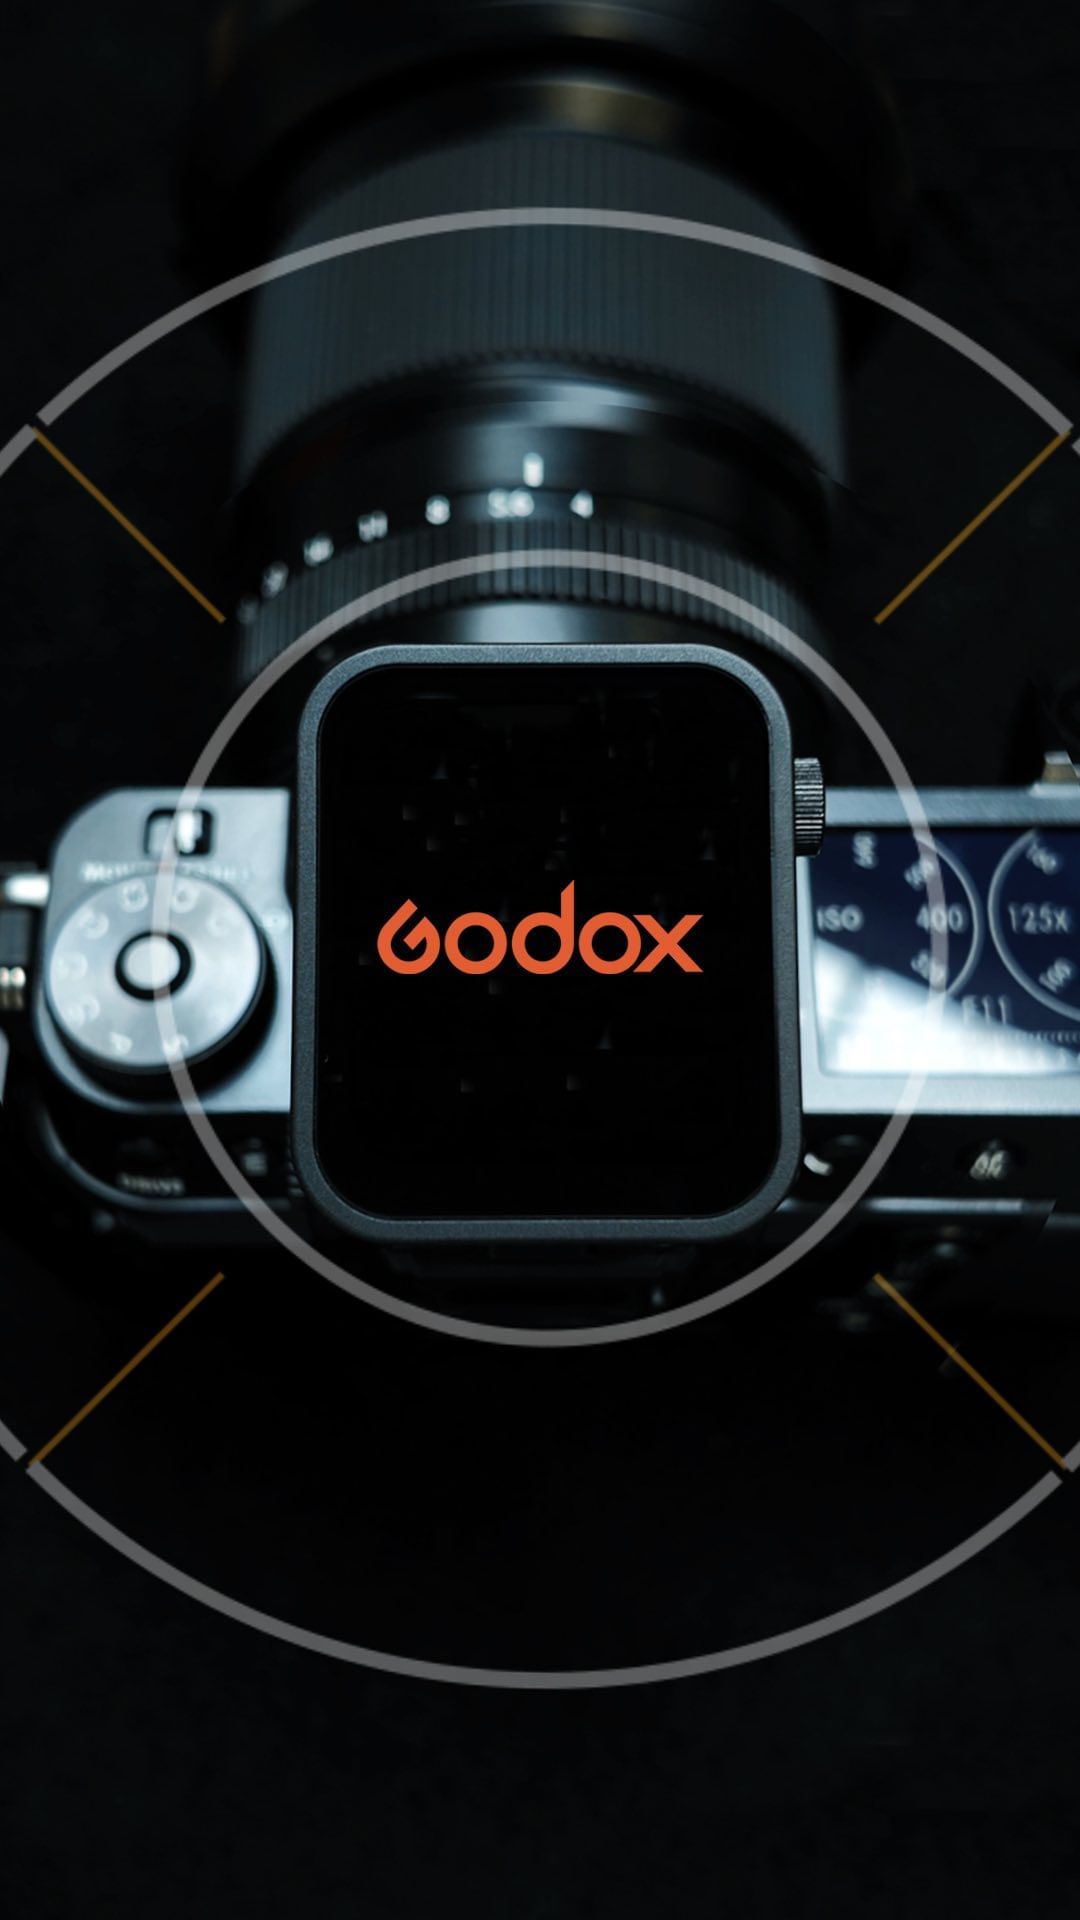 now-available-for-rent-godox-flash-lights-top-quality-for-a-fair-price-because-we-just-couldn-t-ignore-these-new-godox-x3-triggers